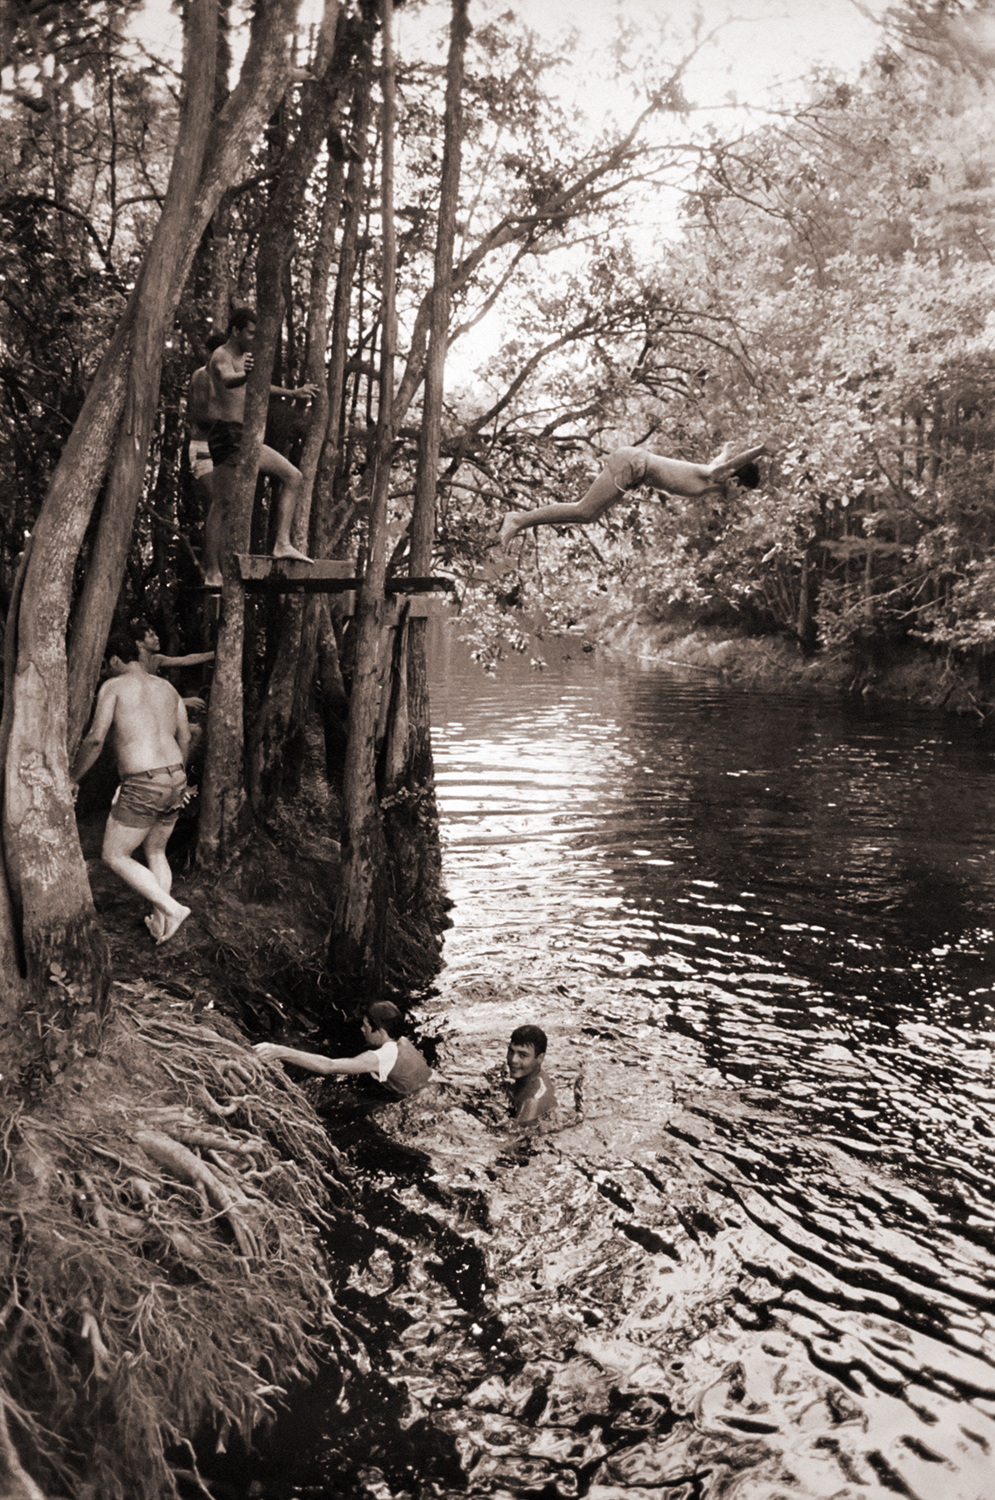   Swimming Hole, Lumber River (Pembroke, NC) , 1988 Gelatin Silver Print 19 1/4 × 13 1/2 in. (image size) The Do Good Fund, Inc., 2016-003 